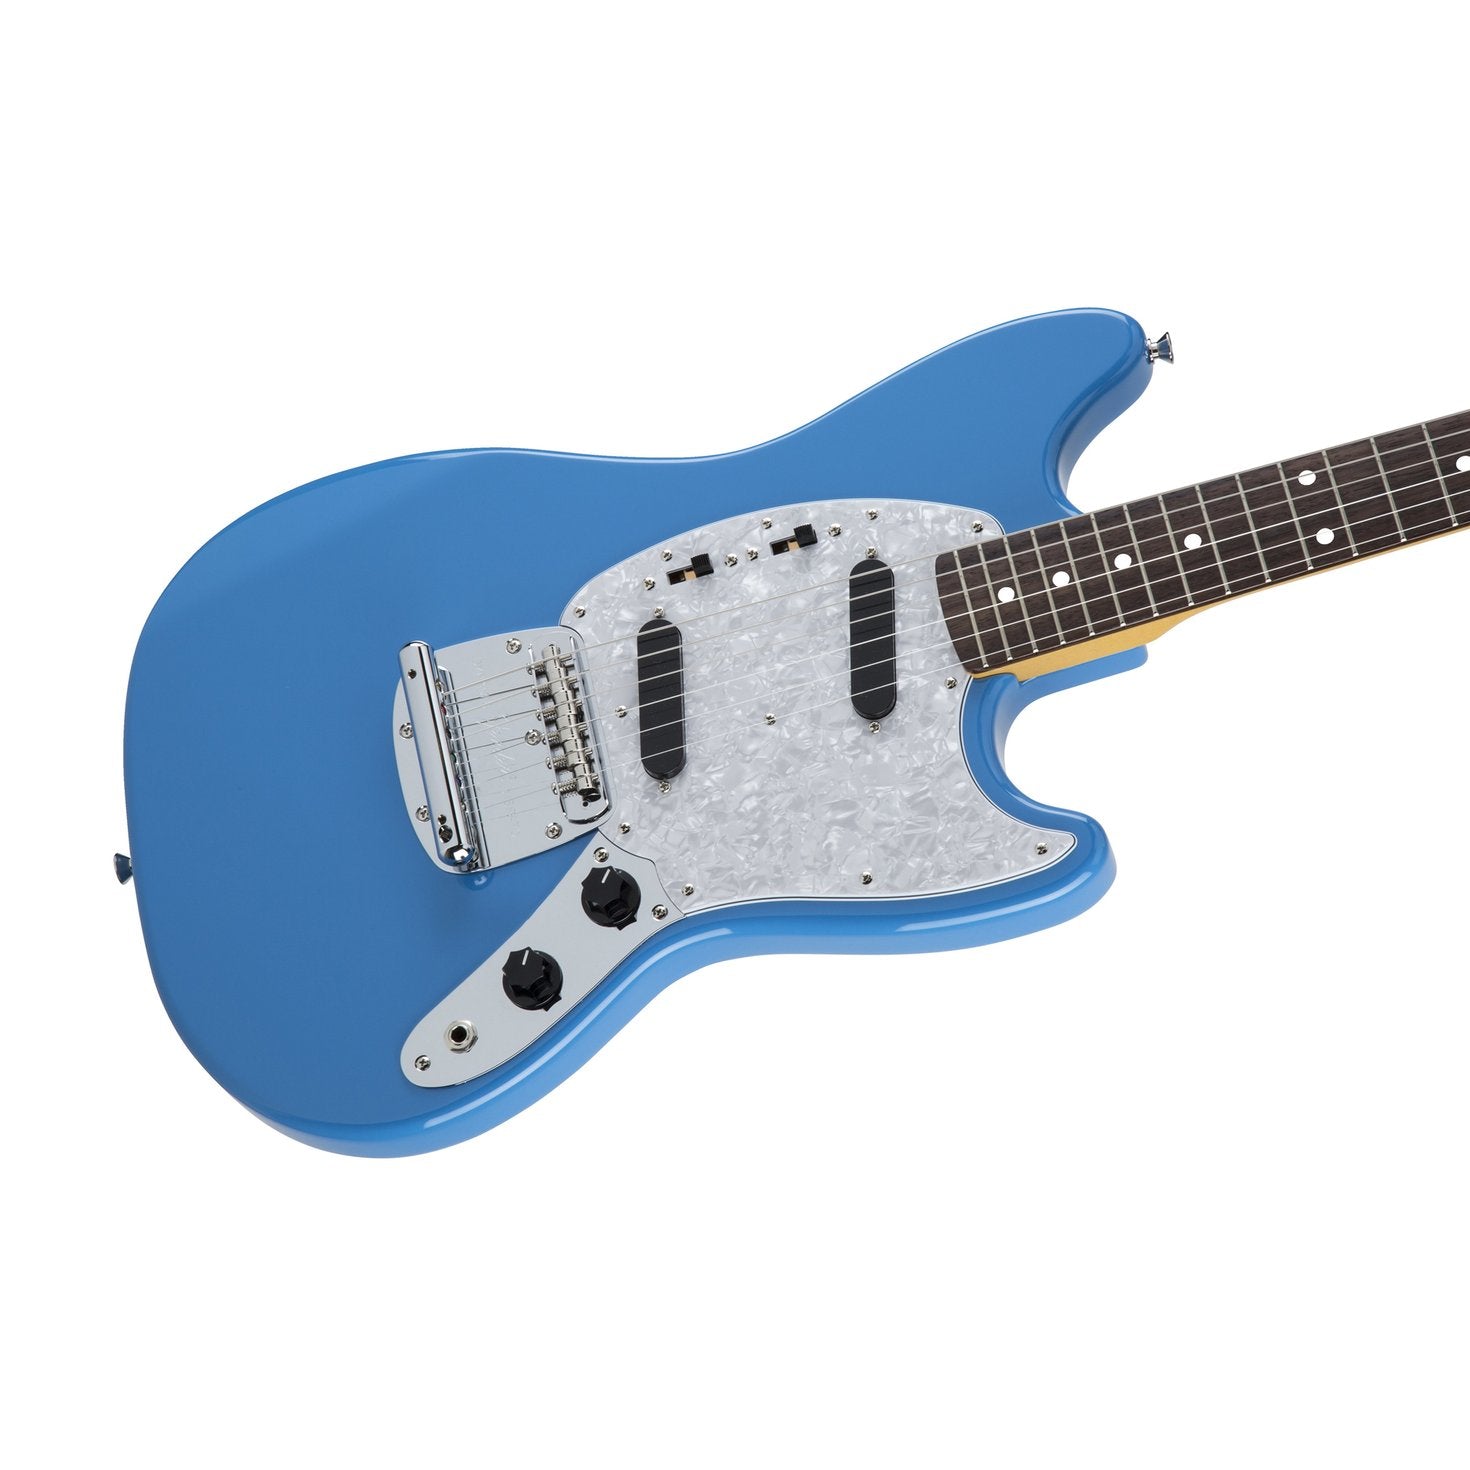 Fender Japan Traditional 70s Matching Headstock Mustang Electric Guitar, RW FB, California Blue, FENDER, ELECTRIC GUITAR, fender-electric-guitar-f03-535-4710-330, ZOSO MUSIC SDN BHD